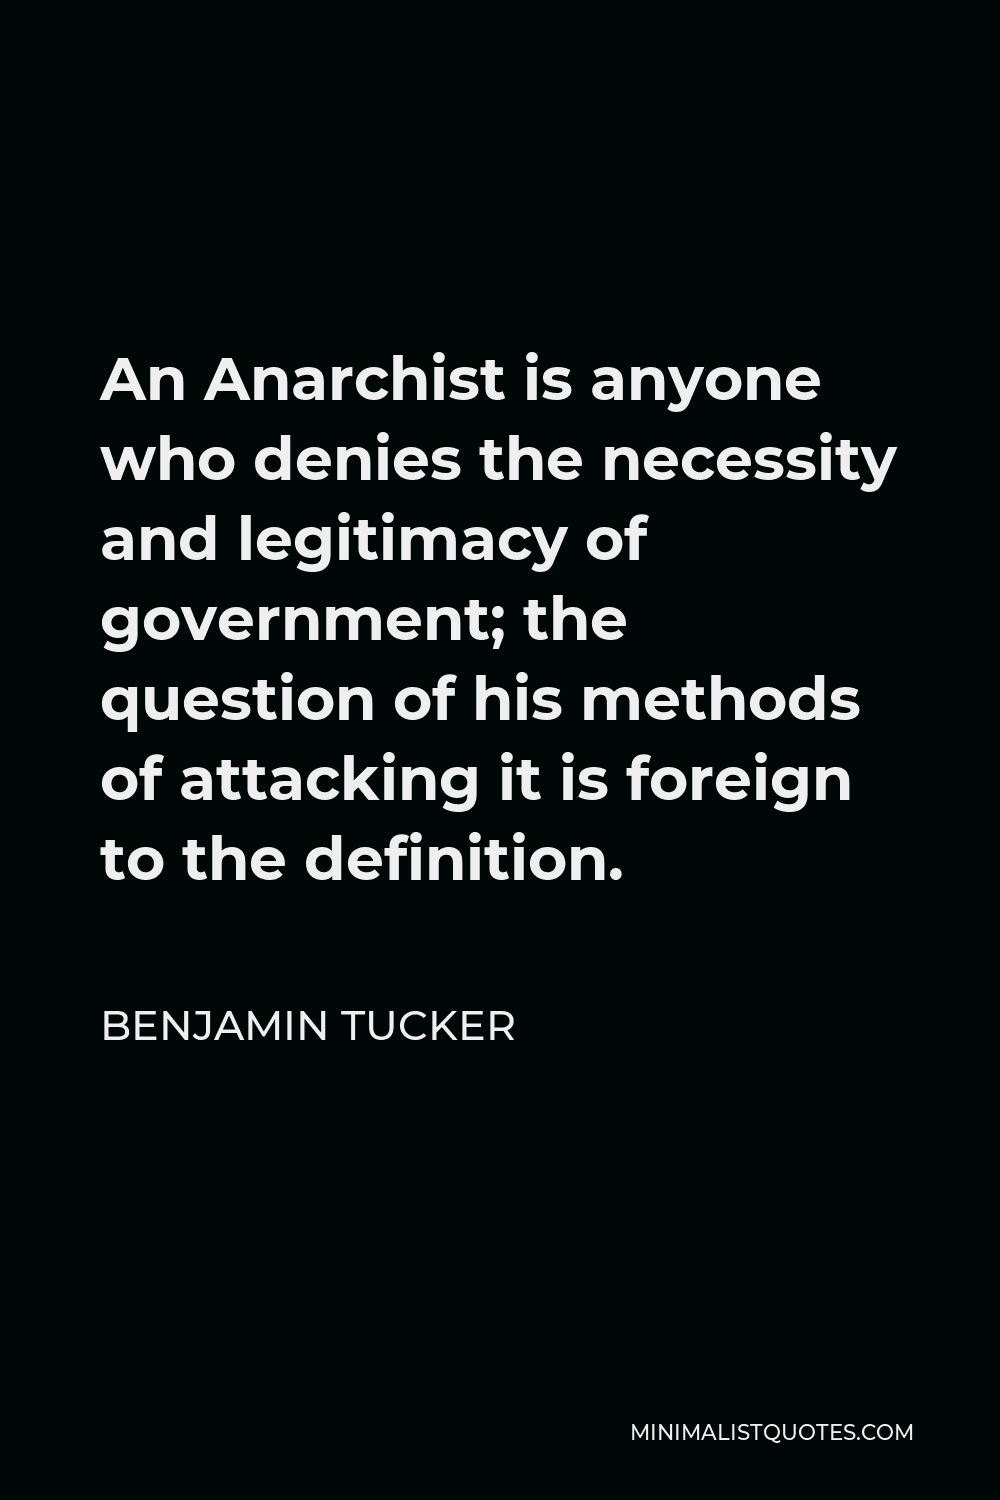 Benjamin Tucker Quote - An Anarchist is anyone who denies the necessity and legitimacy of government; the question of his methods of attacking it is foreign to the definition.